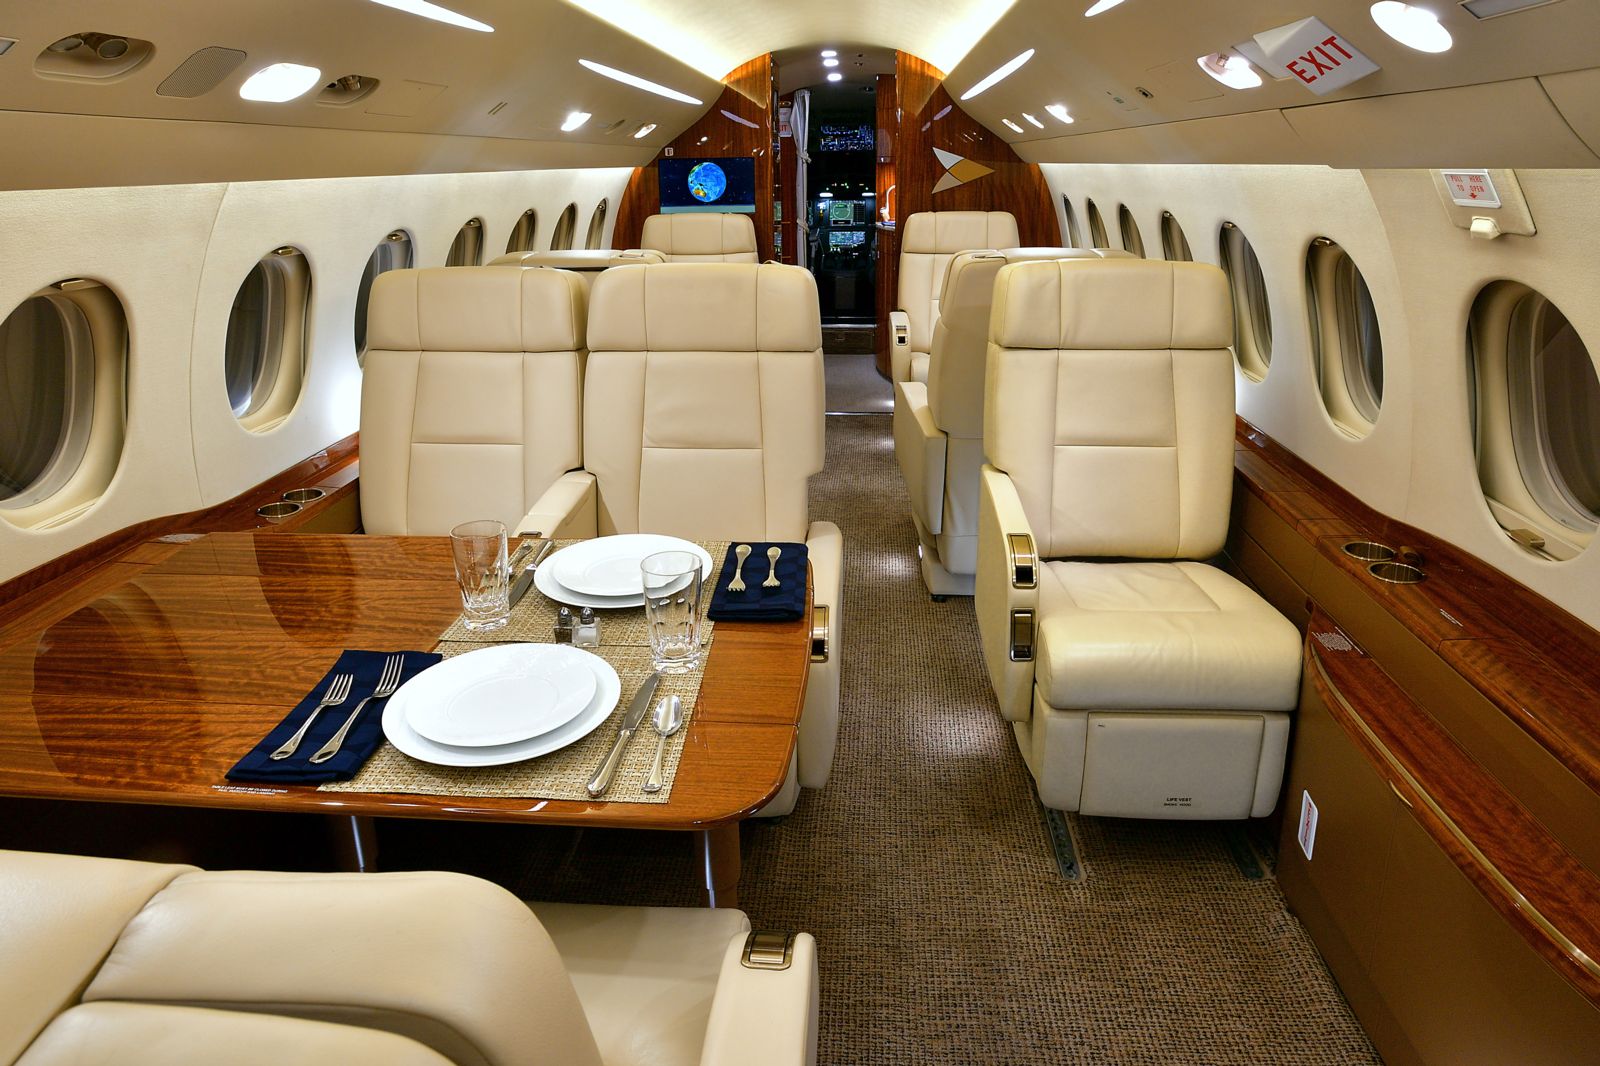 Dassault Falcon 2000LXS  S/N 291 for sale | gallery image: /userfiles/files/int8a_300.jpg